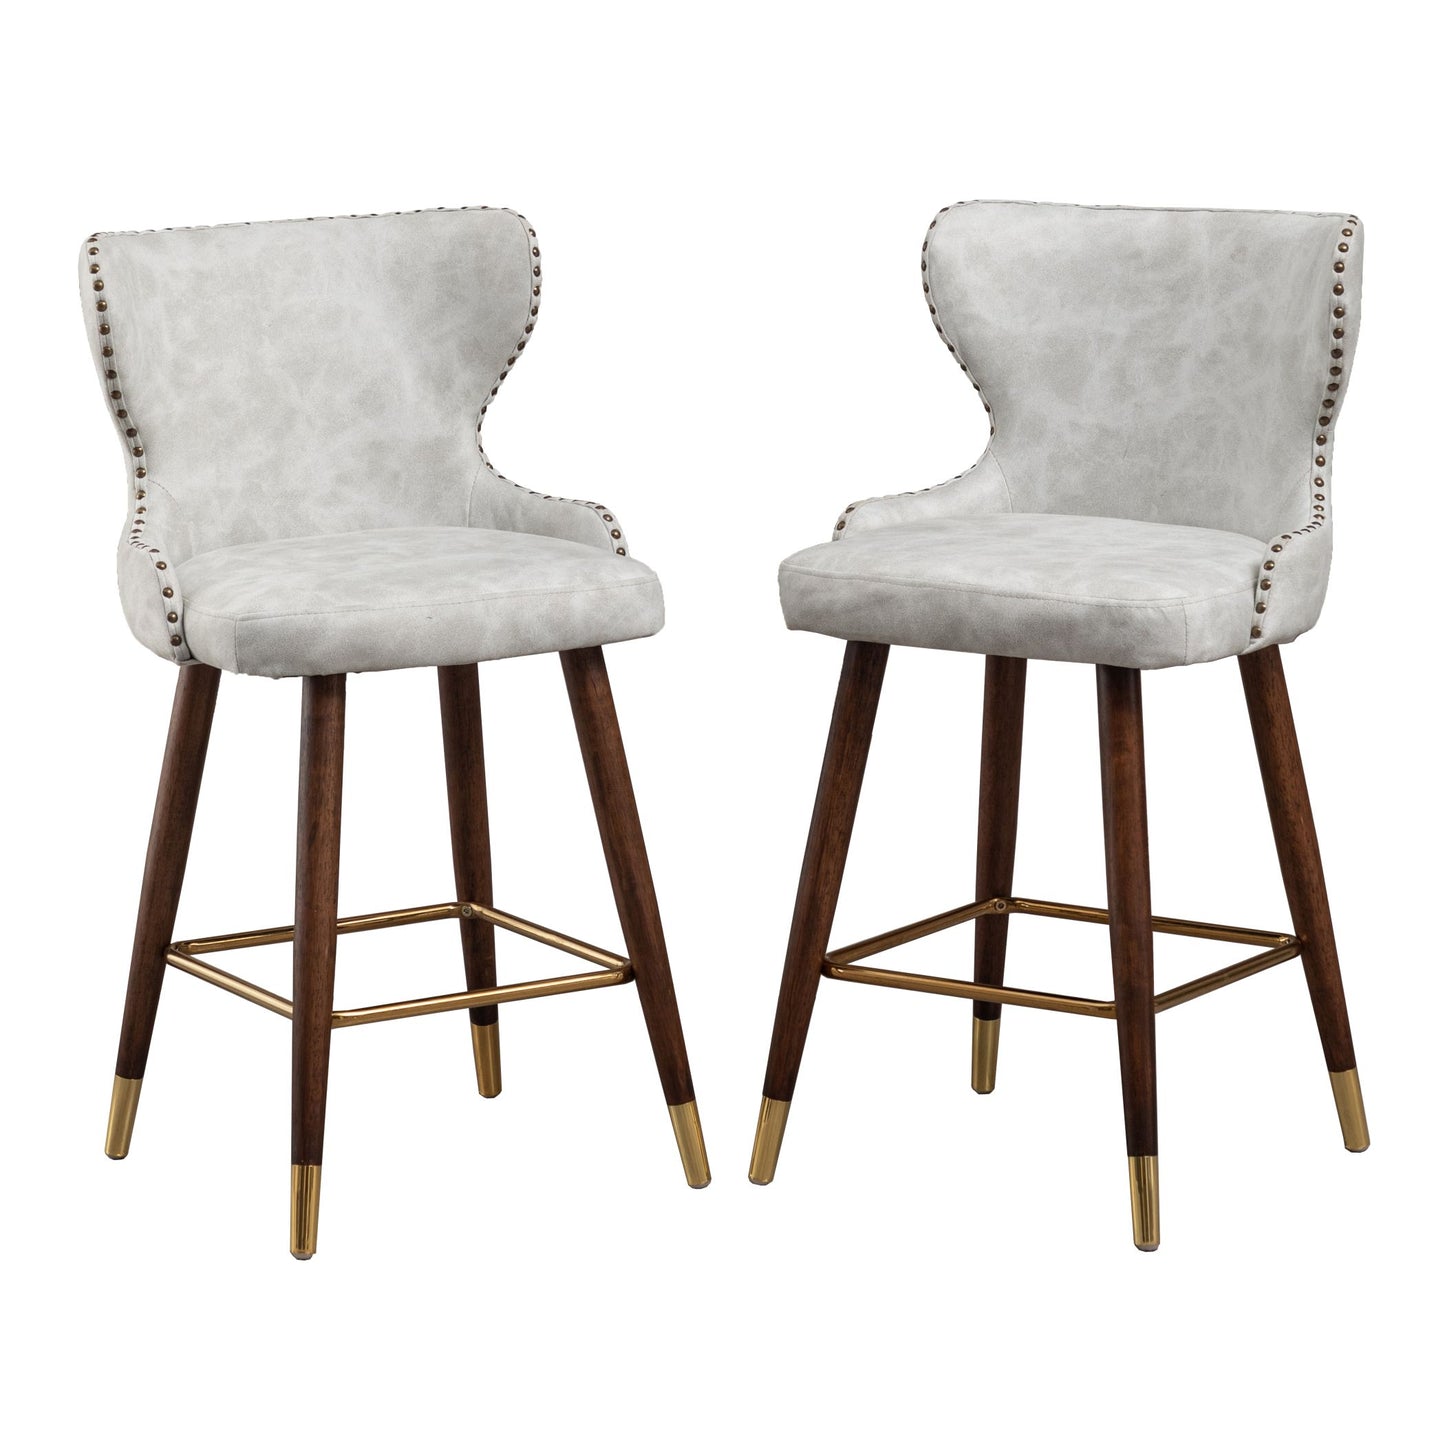 Nevis Mid-century Modern Faux Leather Tufted Nailhead Trim Counter Stools, Set of 2